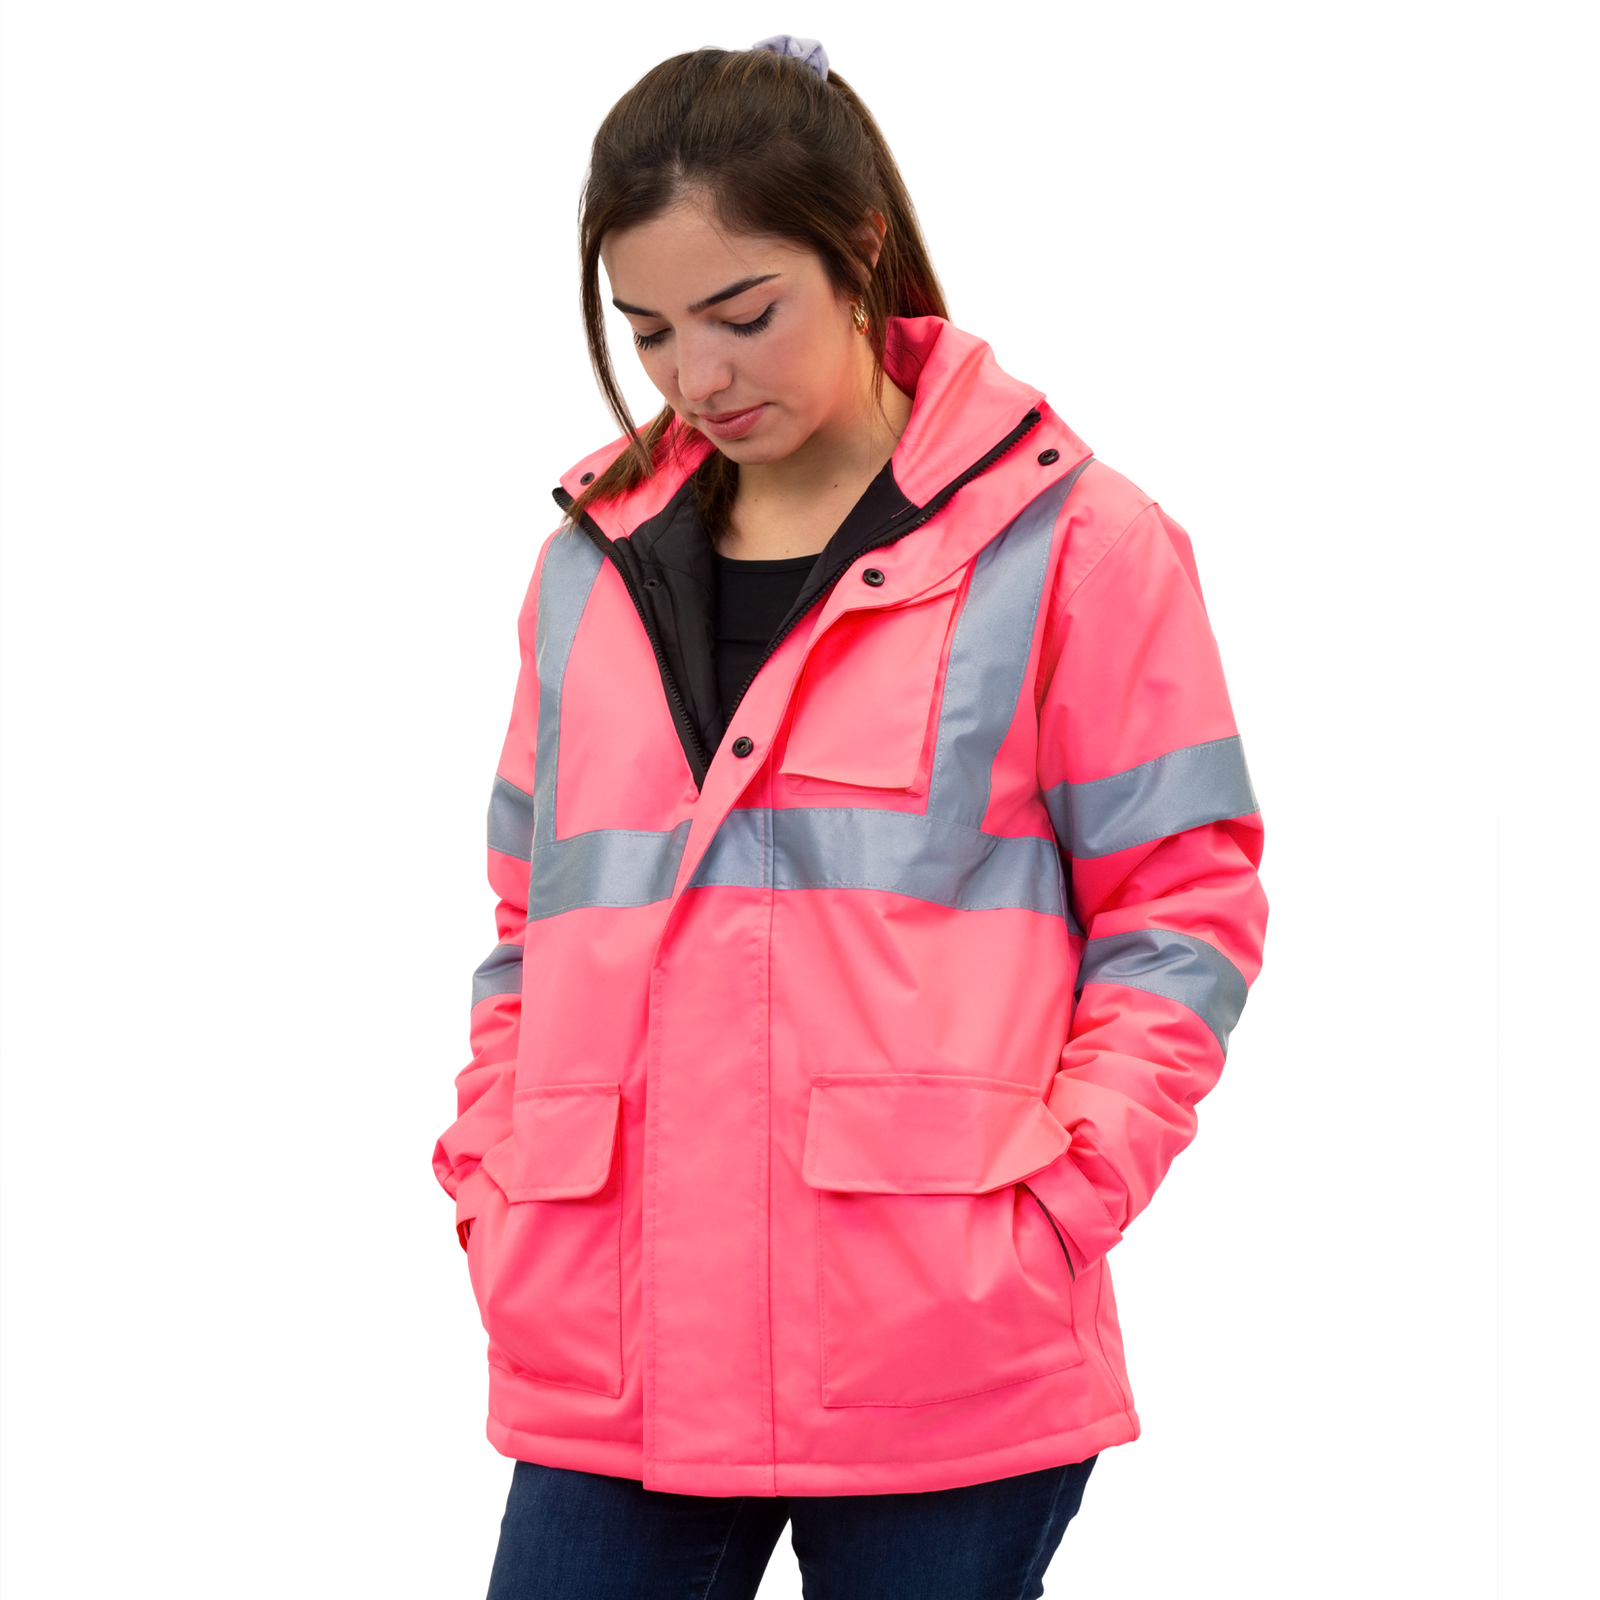 Woman wearing the Jorestech high visibility safety pink jacket with reflective strips